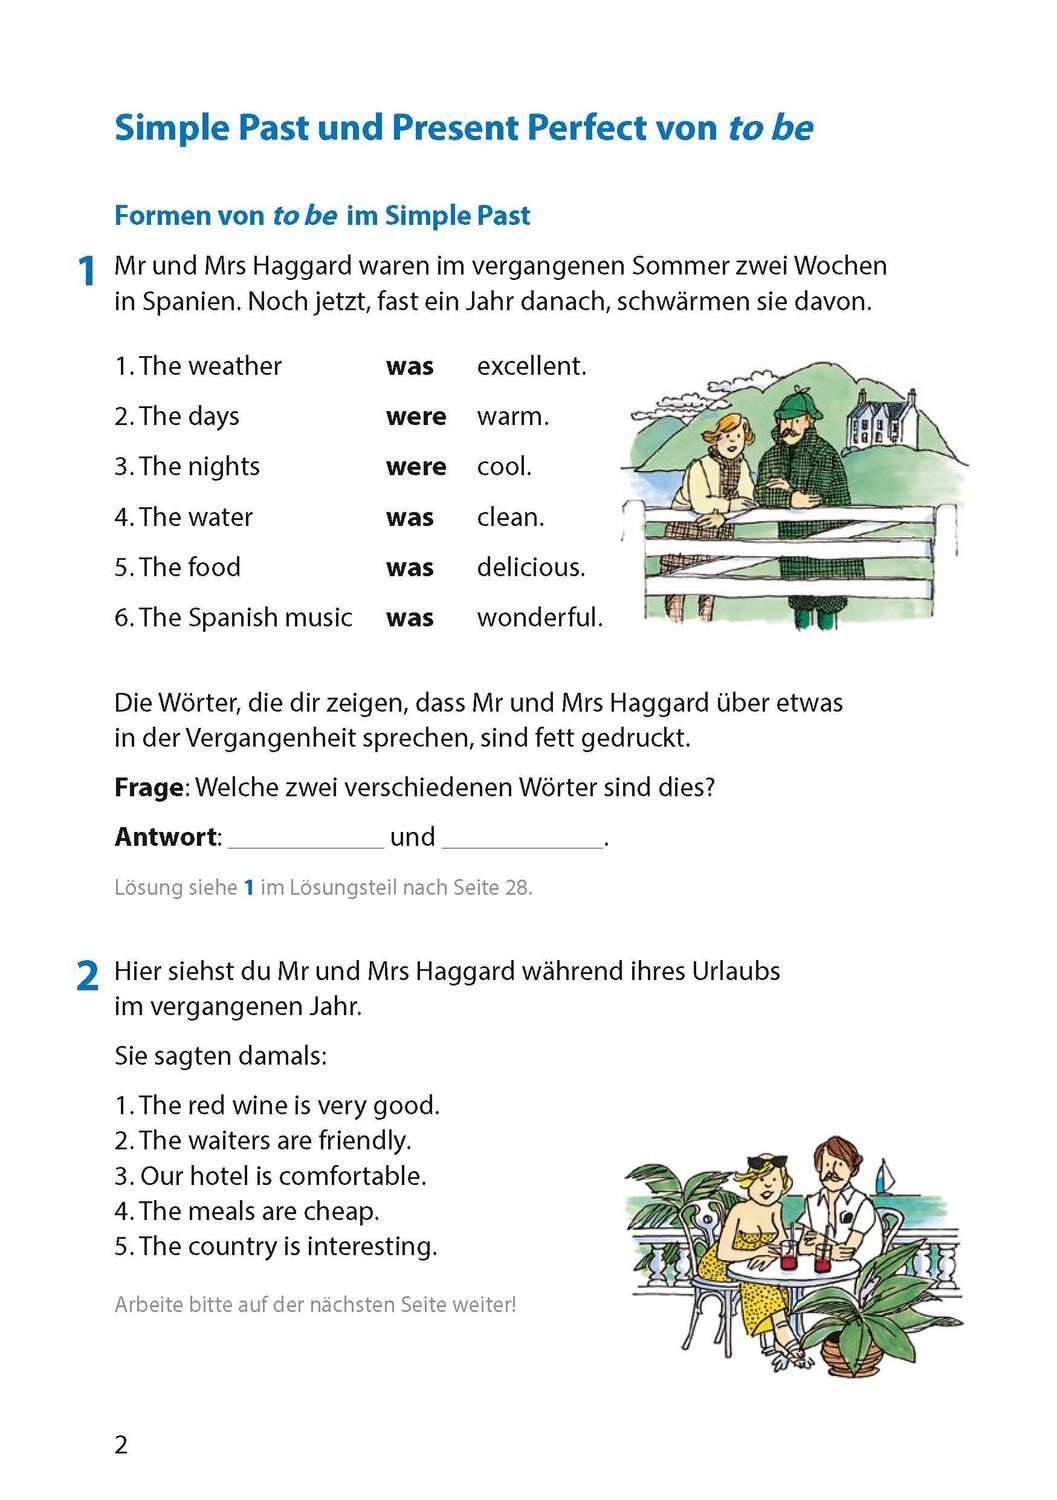 Bild: 9783881003056 | Englisch. Simple Past and Present Perfect | Ludwig Waas | Broschüre